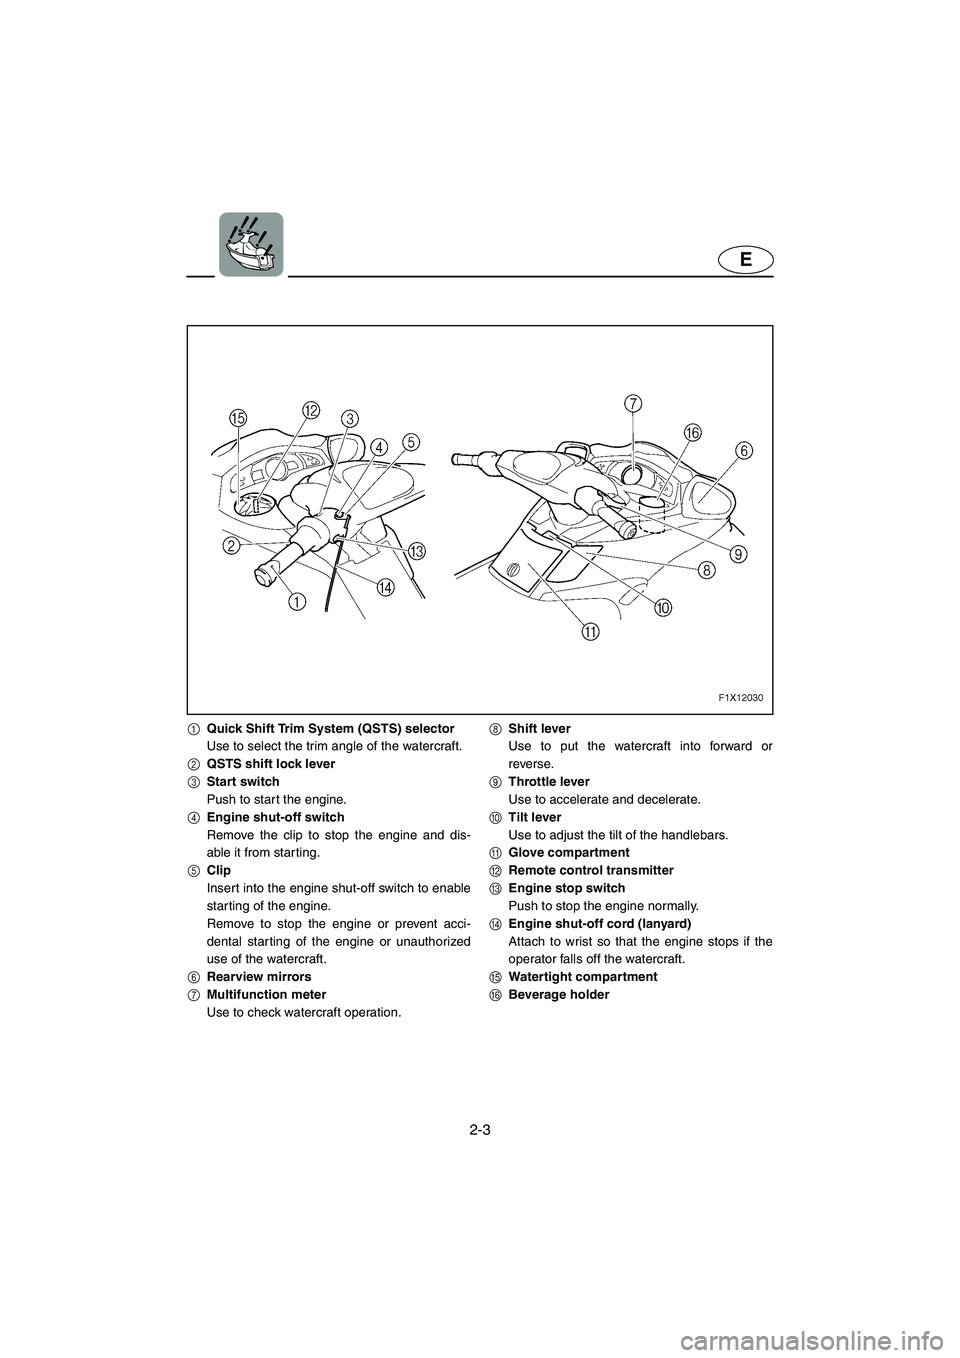 YAMAHA FX HO 2006  Owners Manual 2-3
E
1Quick Shift Trim System (QSTS) selector
Use to select the trim angle of the watercraft.
2QSTS shift lock lever
3Start switch
Push to start the engine.
4Engine shut-off switch
Remove the clip to